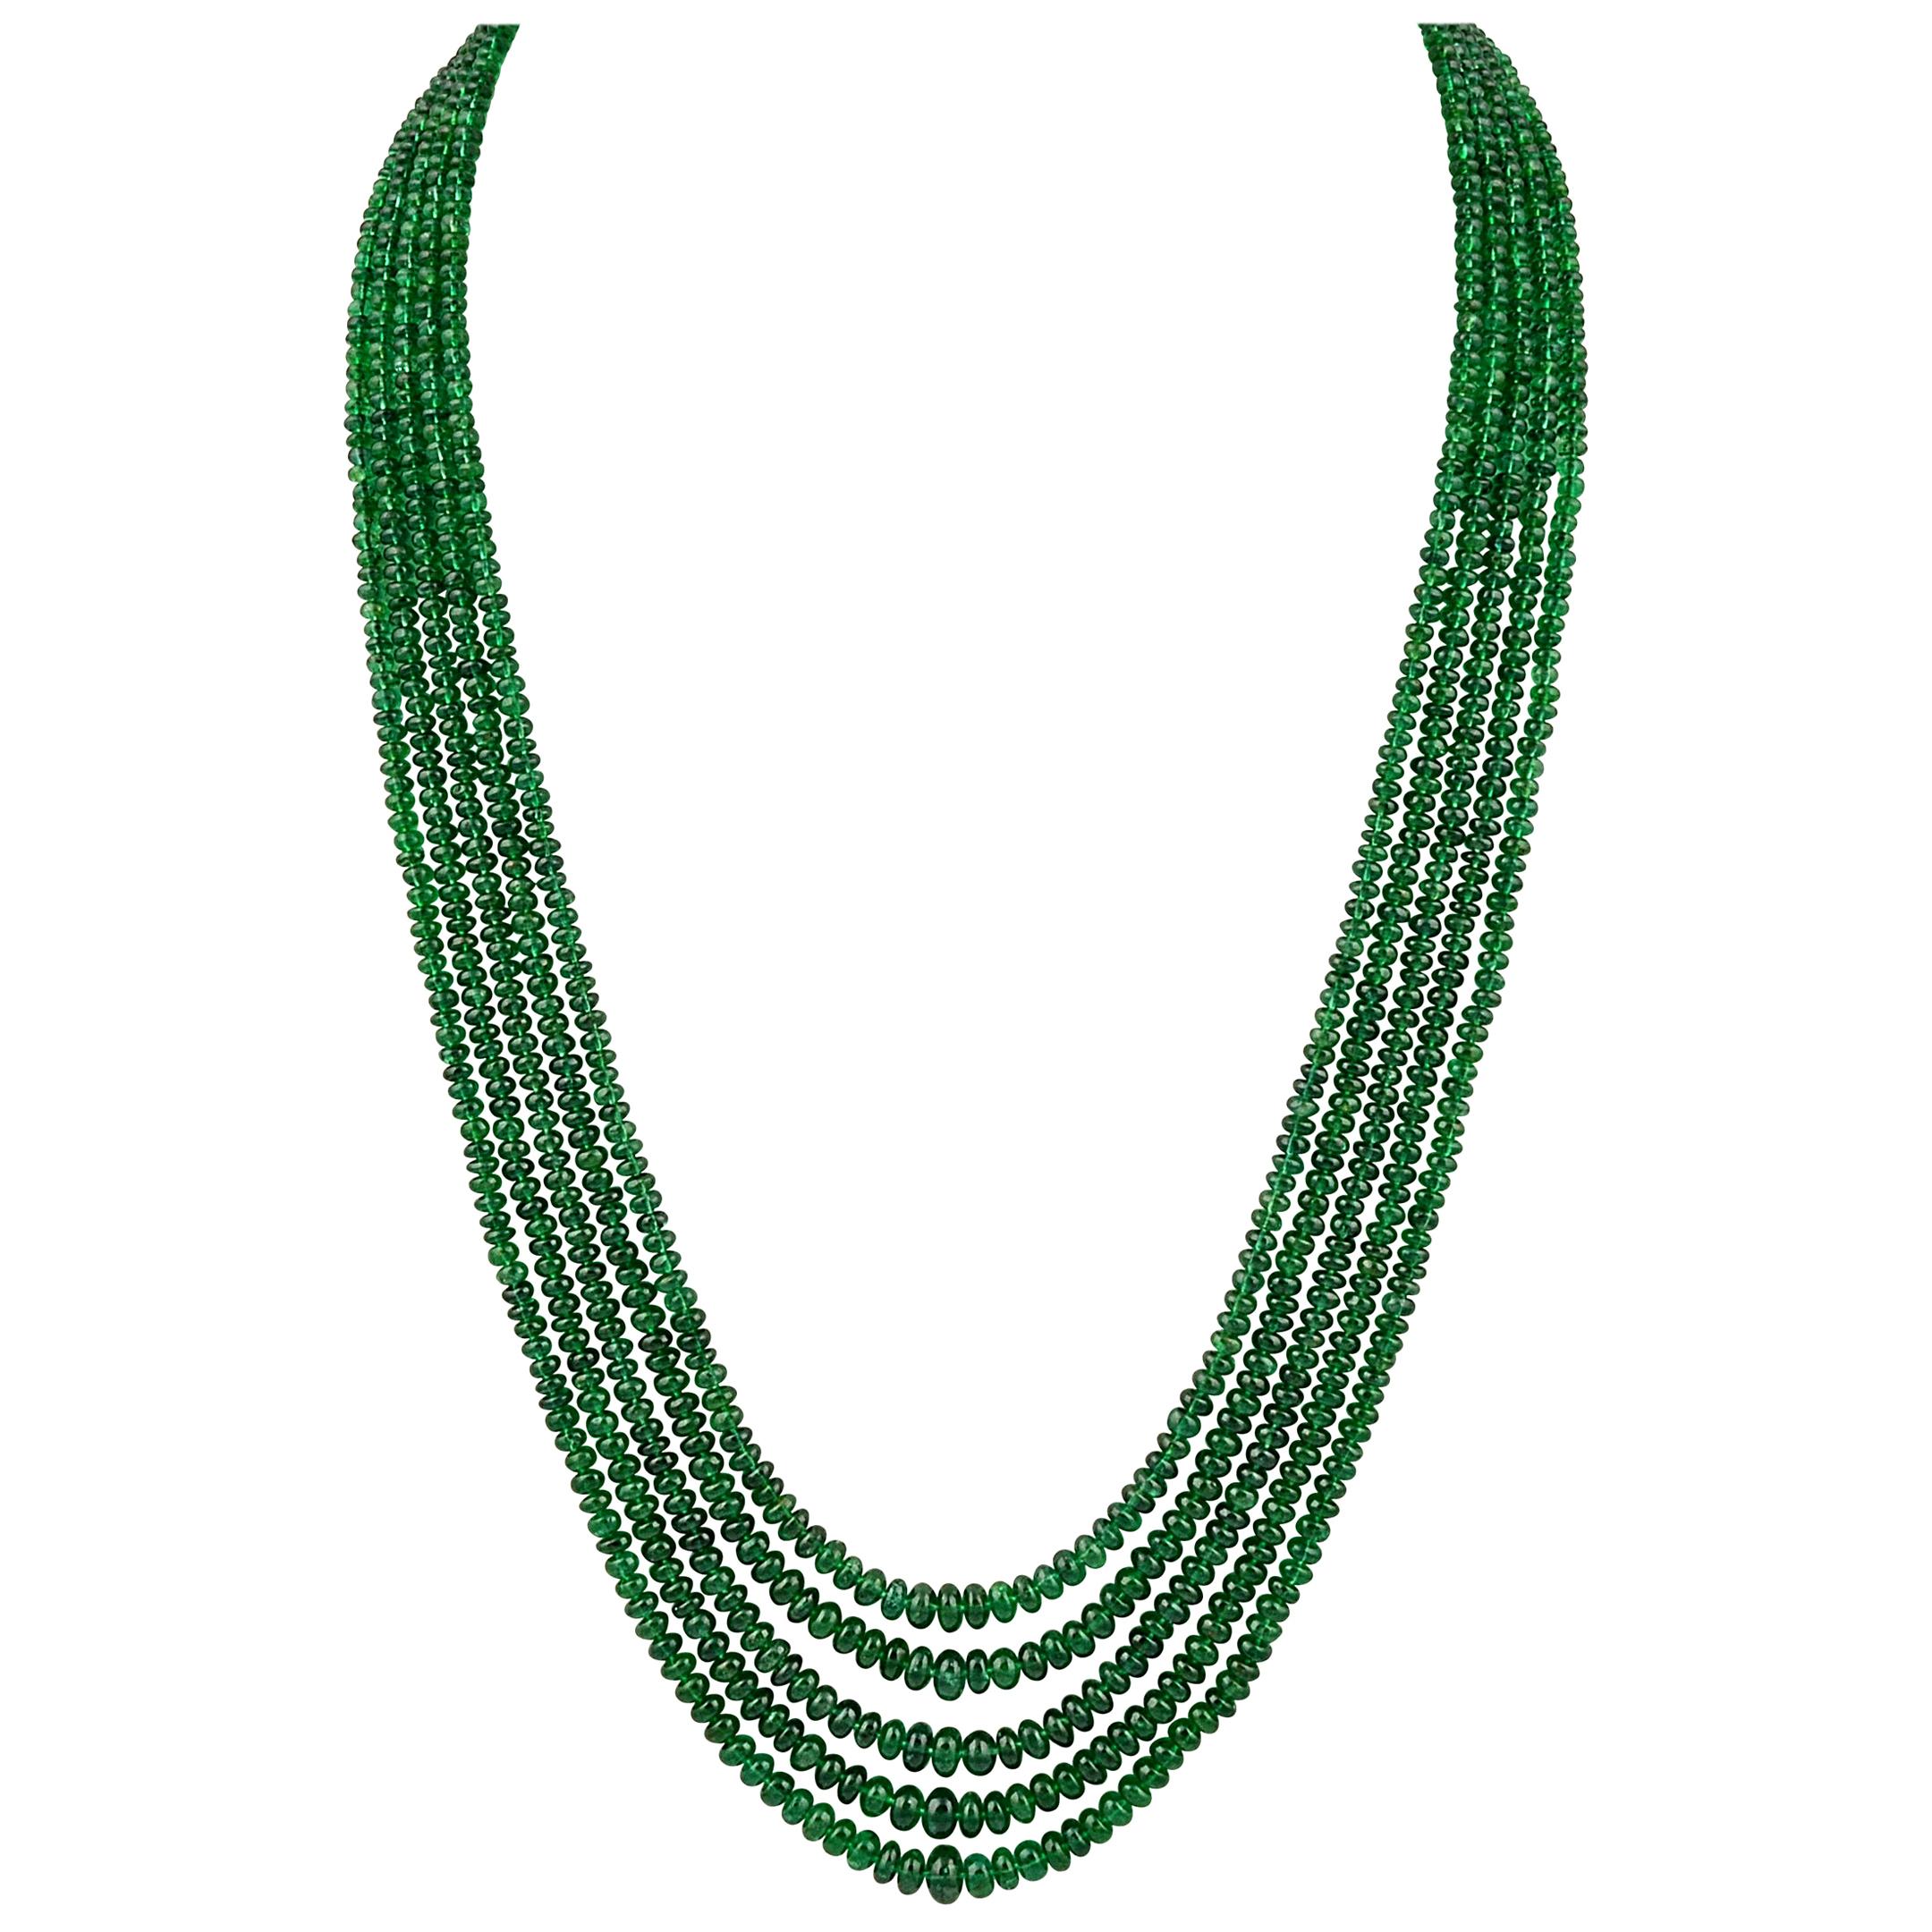 300ct Fine Emerald Beads 5 Line Necklace with 14 kt Yellow Gold Clasp Adjustable For Sale